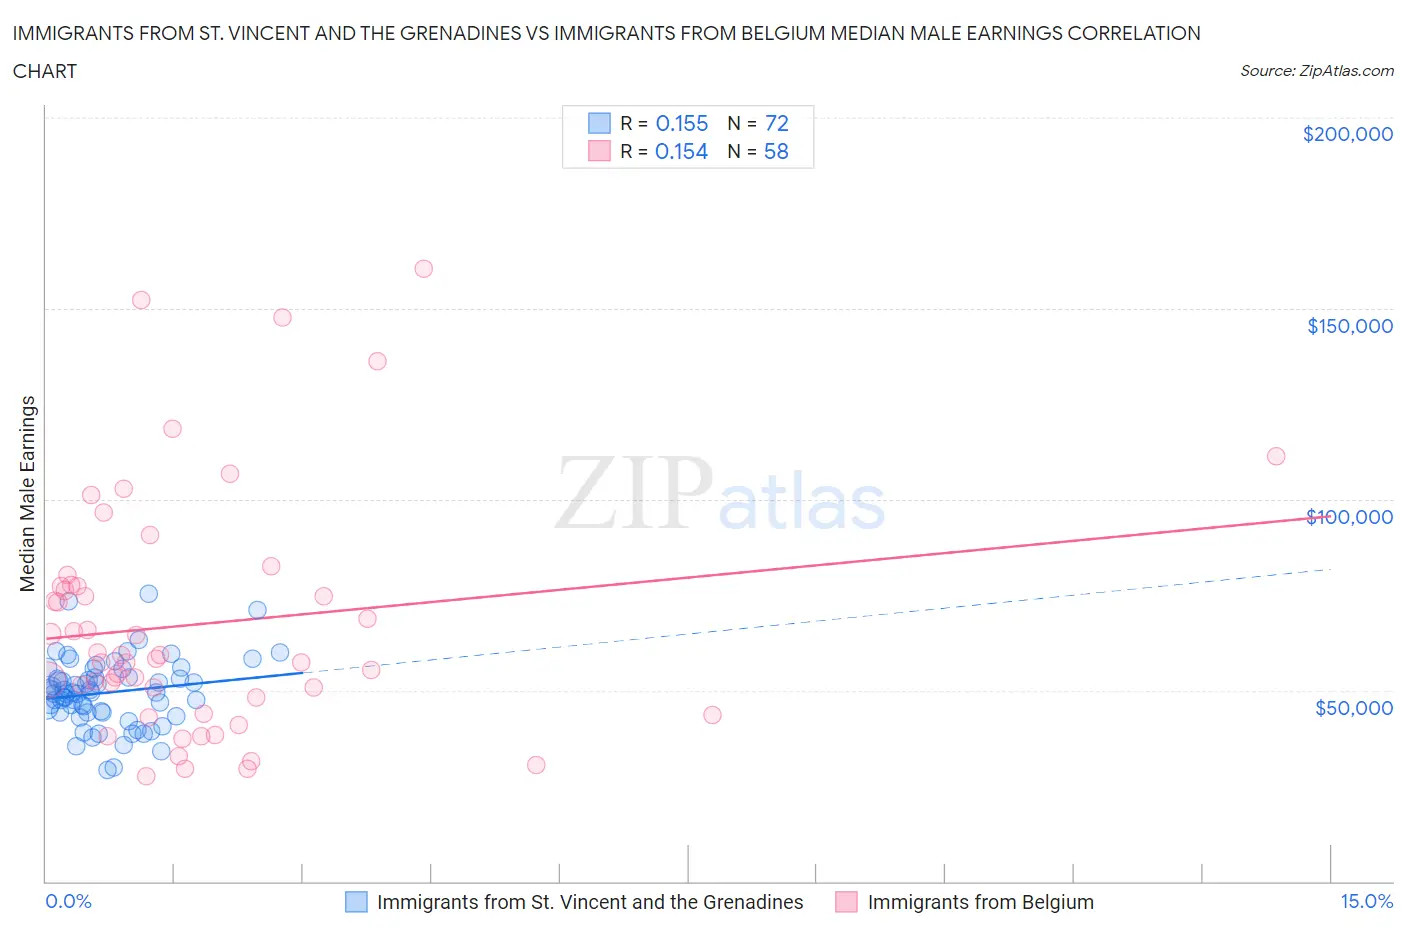 Immigrants from St. Vincent and the Grenadines vs Immigrants from Belgium Median Male Earnings